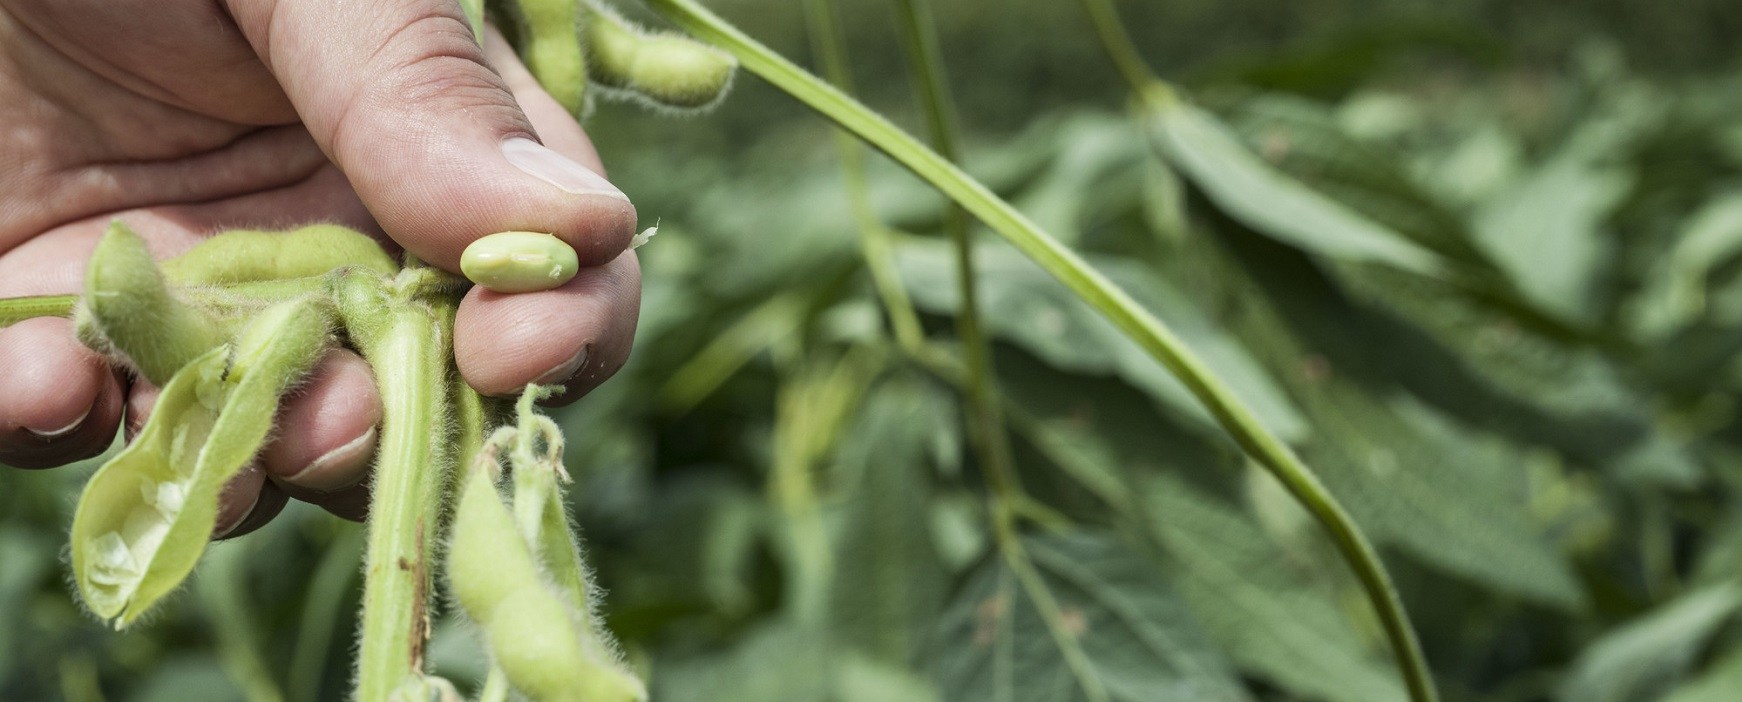 Holding a soy bean from a pod between fingers